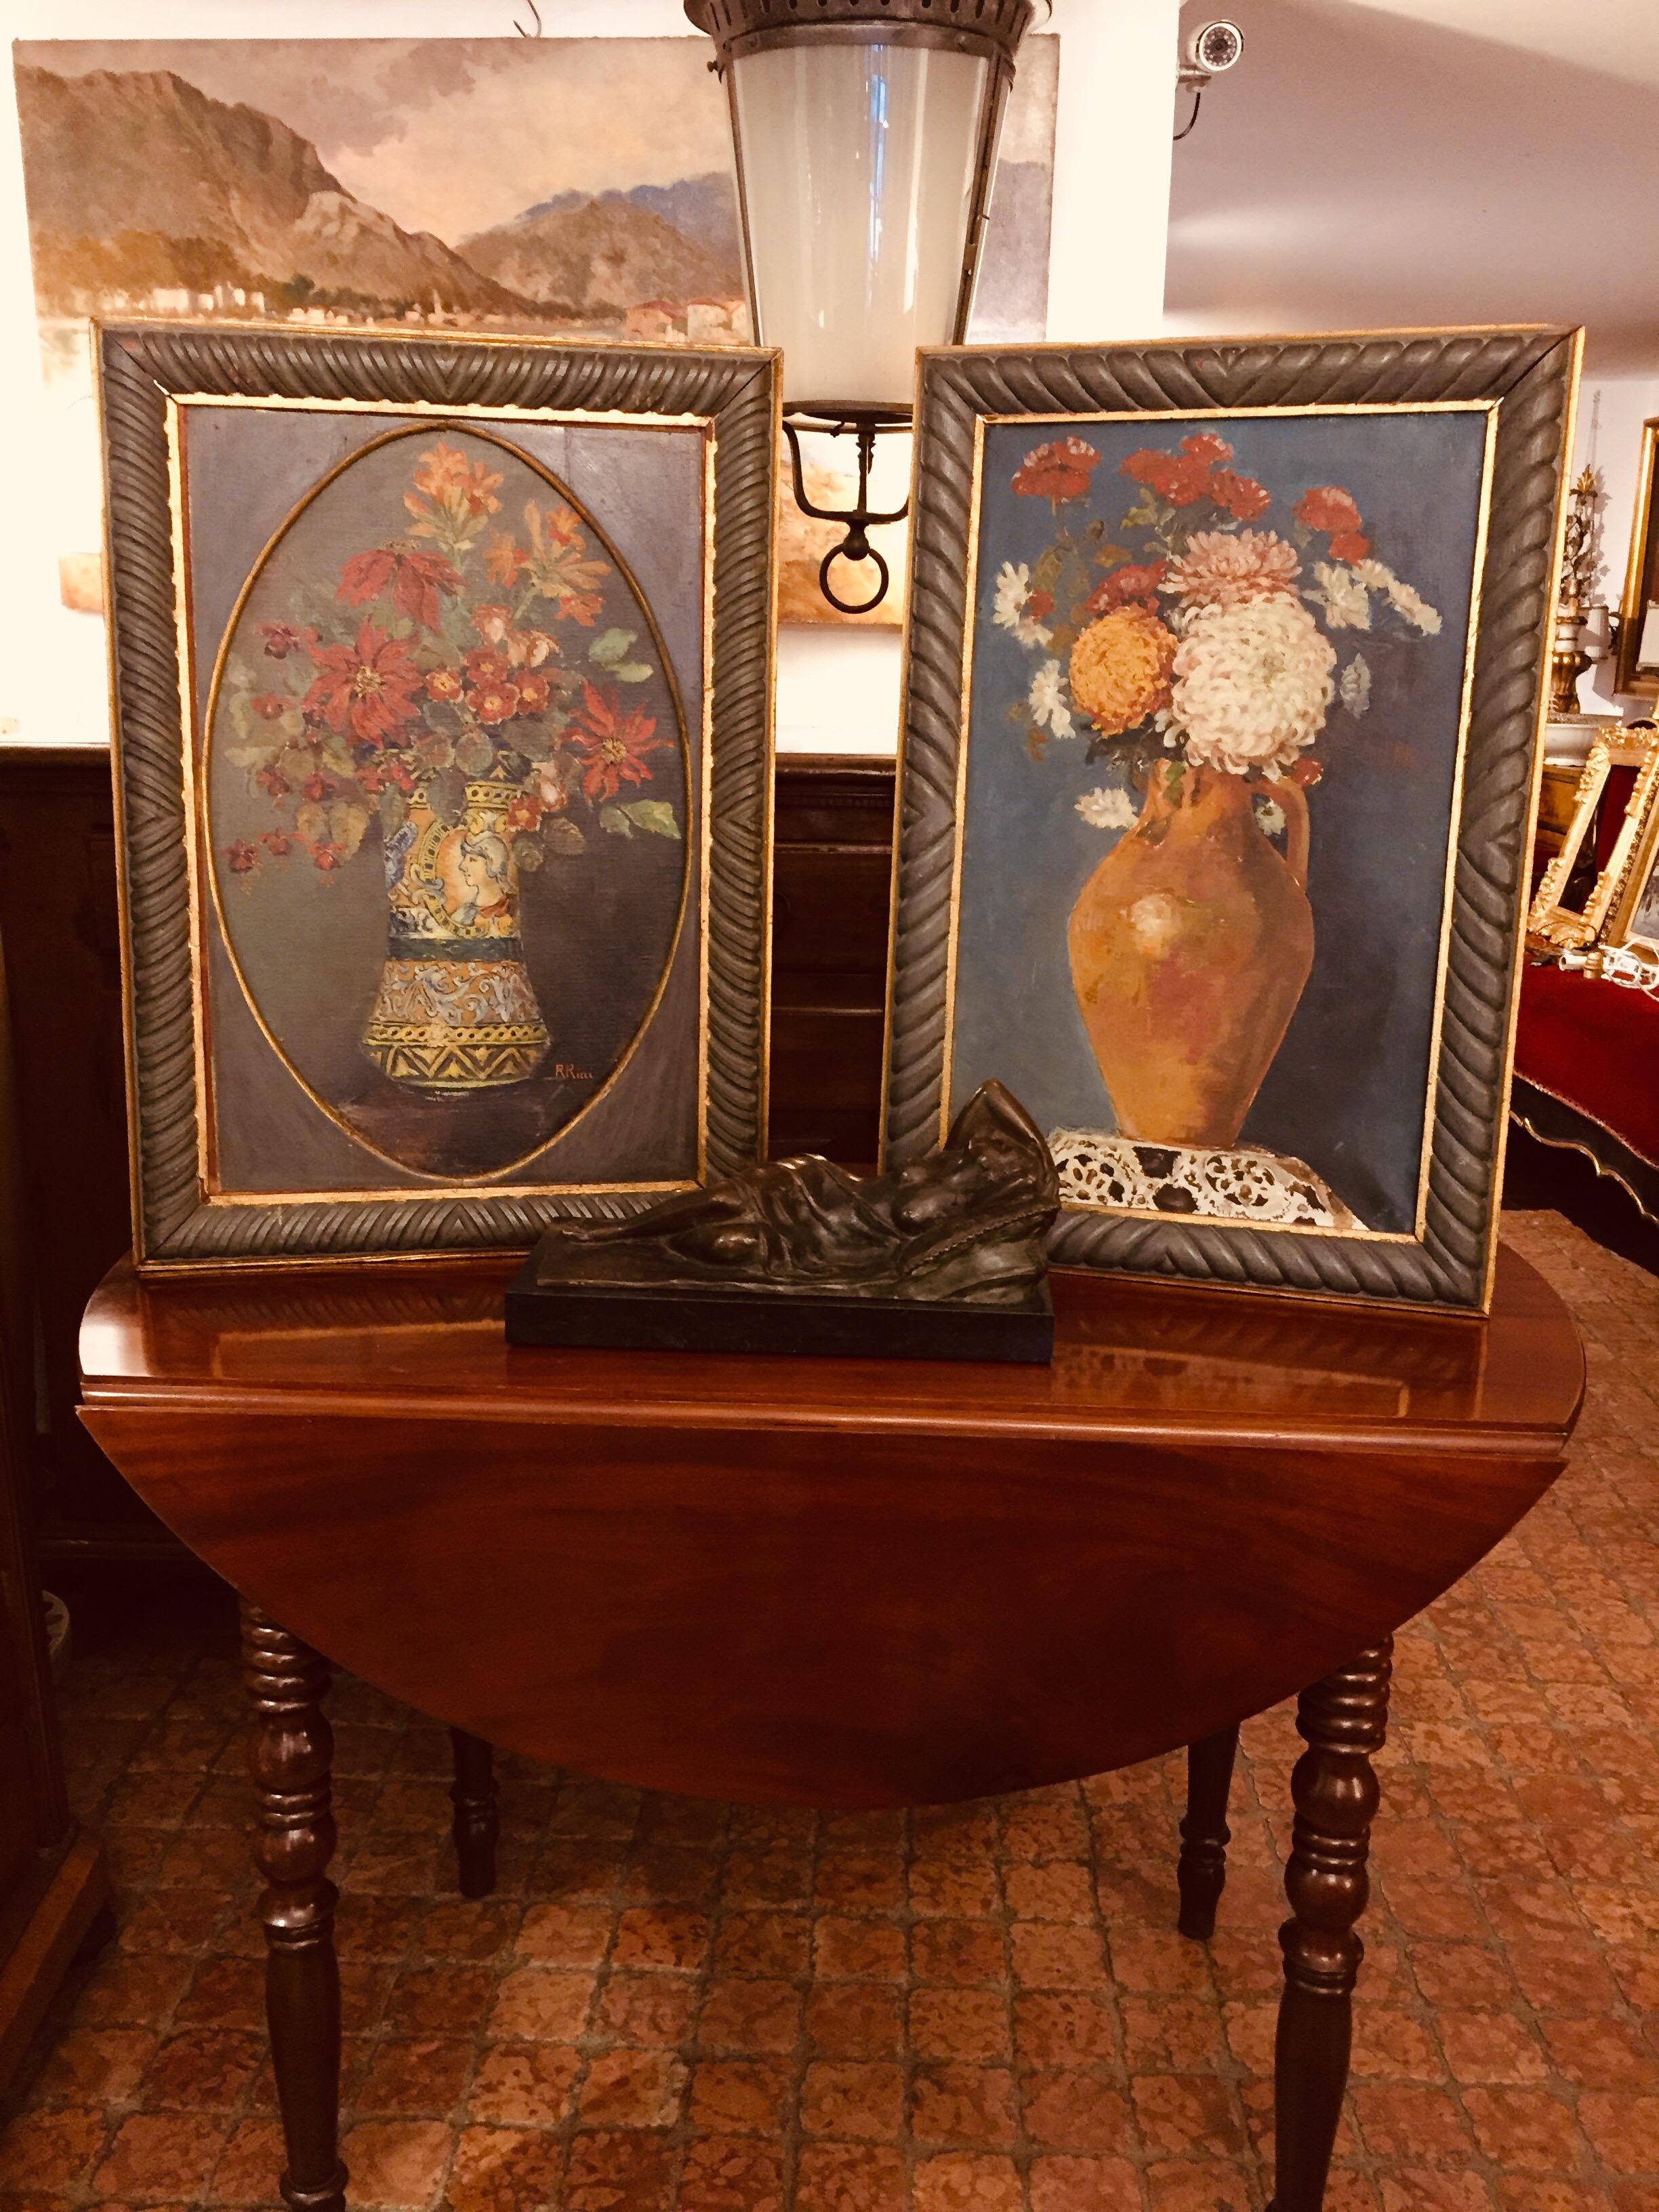 Pair of Italian Flower Still life Paintings by Ricci 20th Century Green Frames For Sale 4